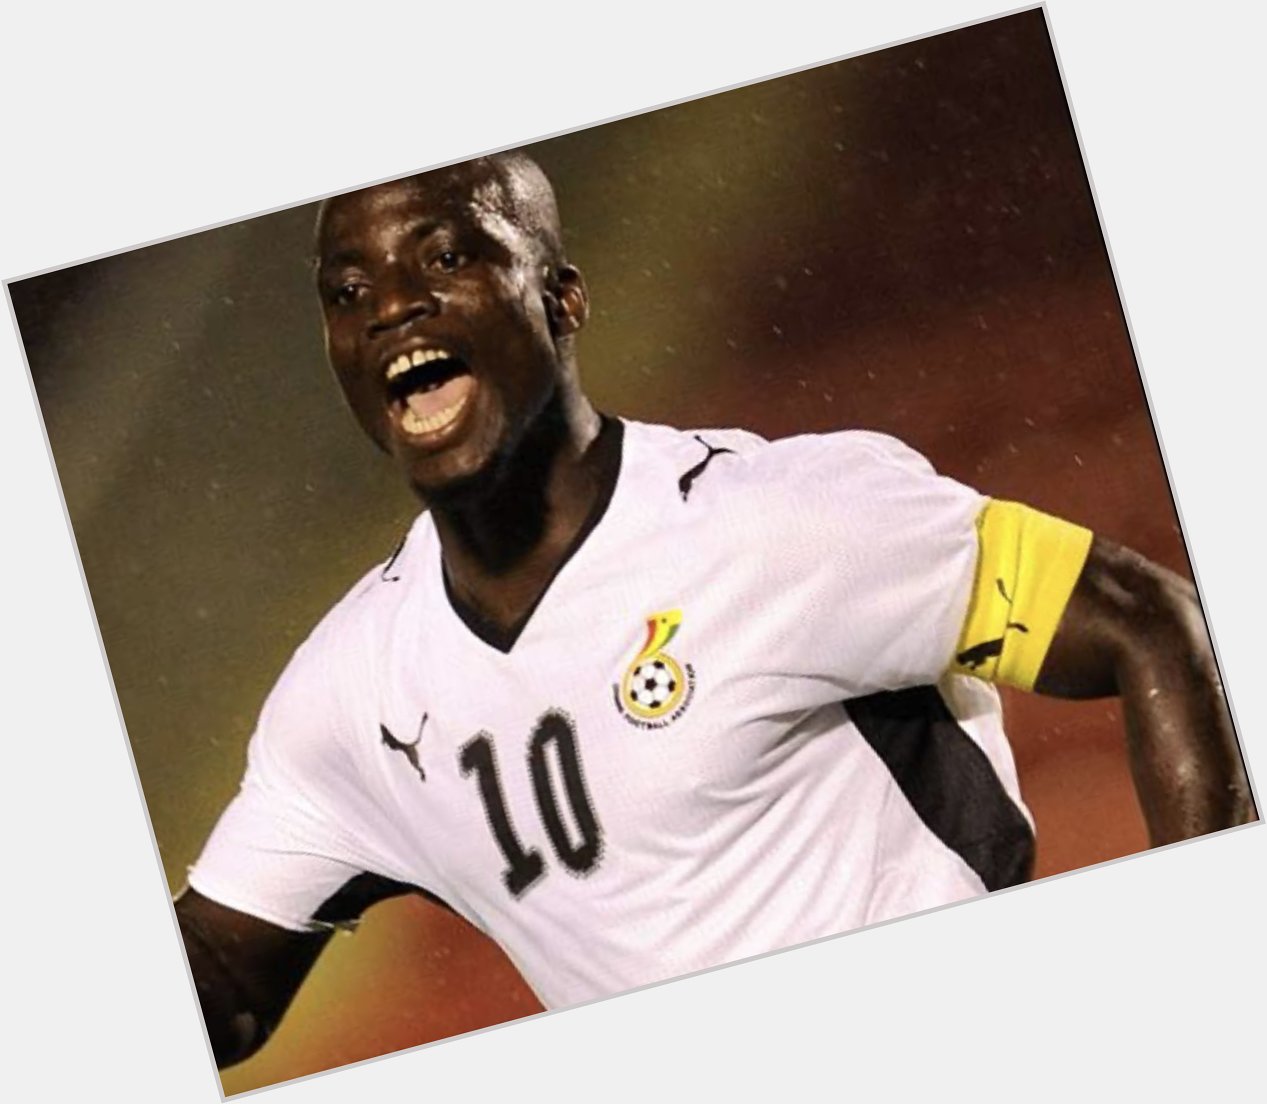 Happy Birthday to former Ghana captain Stephen Appiah

He turns 42 years today 